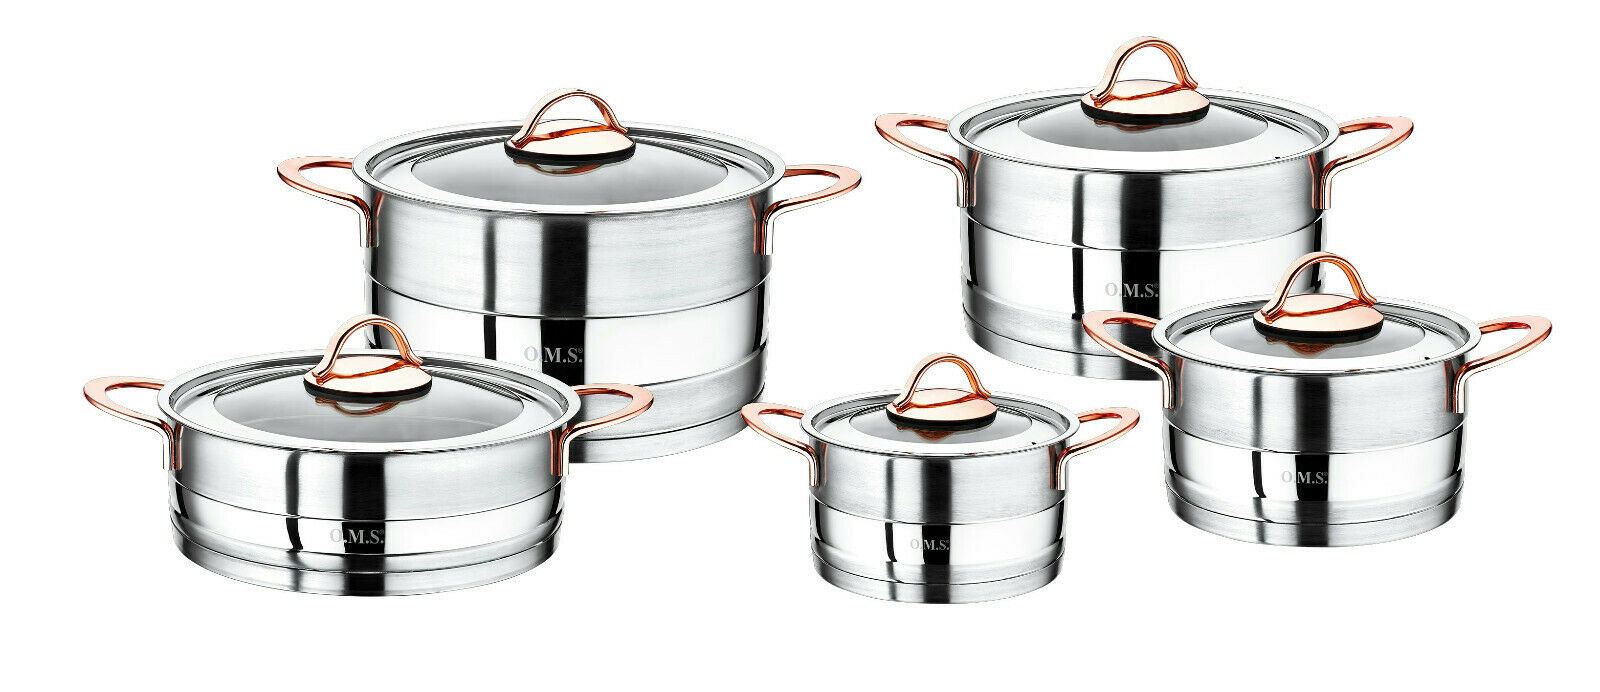 O.M.S. 10 Piece Commercial Professional Cookware Stock Pot Set 18/10 S/Steel Copper